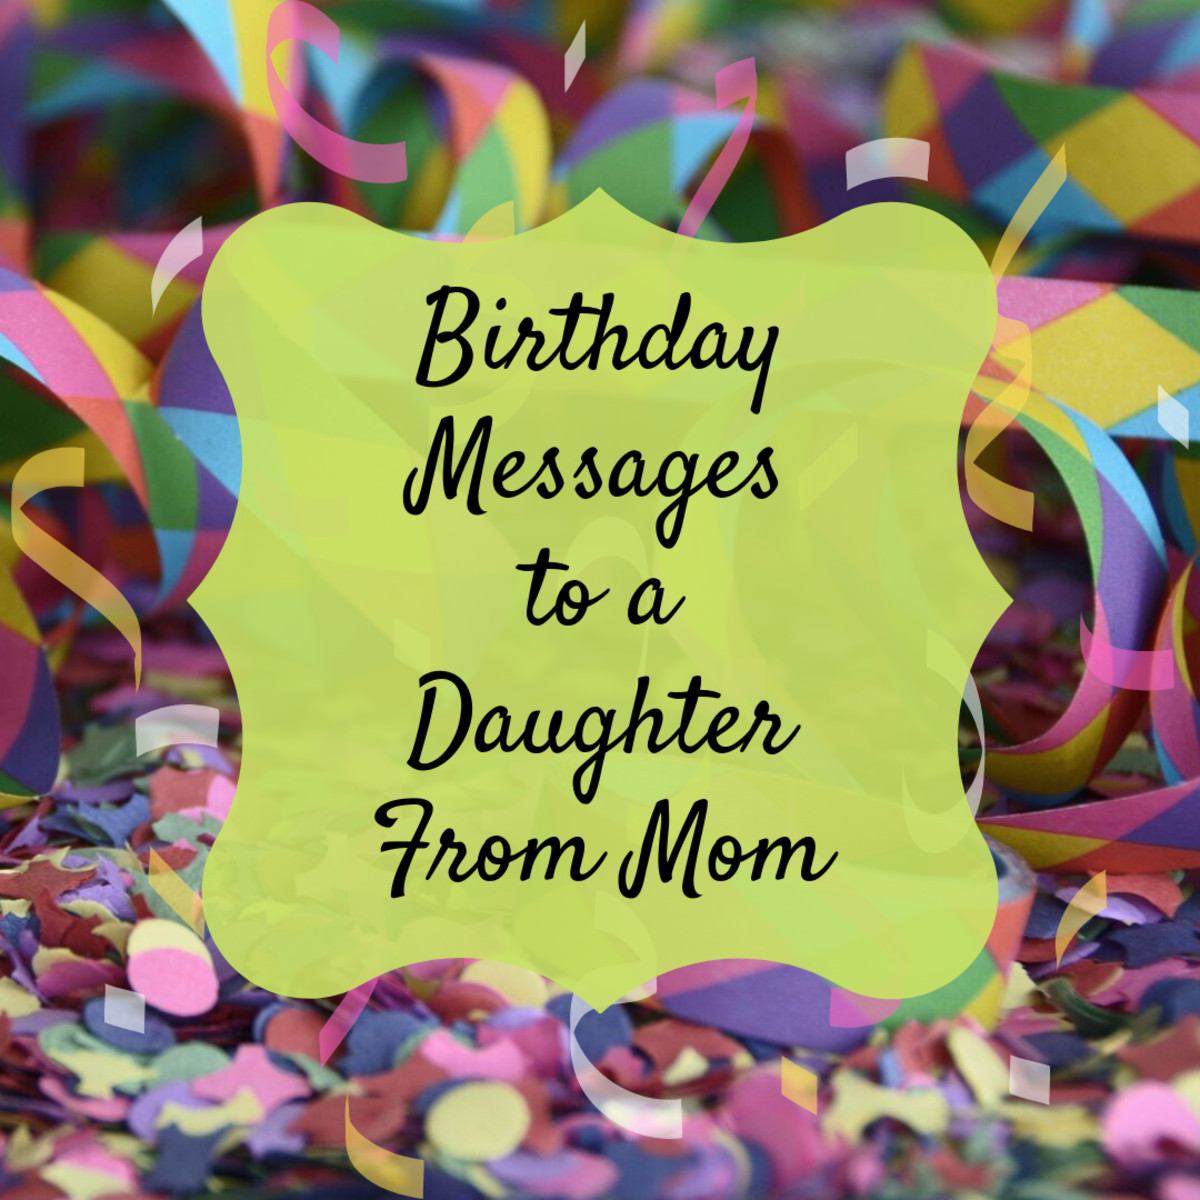 Mom Birthday Wishes From Daughter
 Birthday Wishes Texts and Quotes for a Daughter From Mom